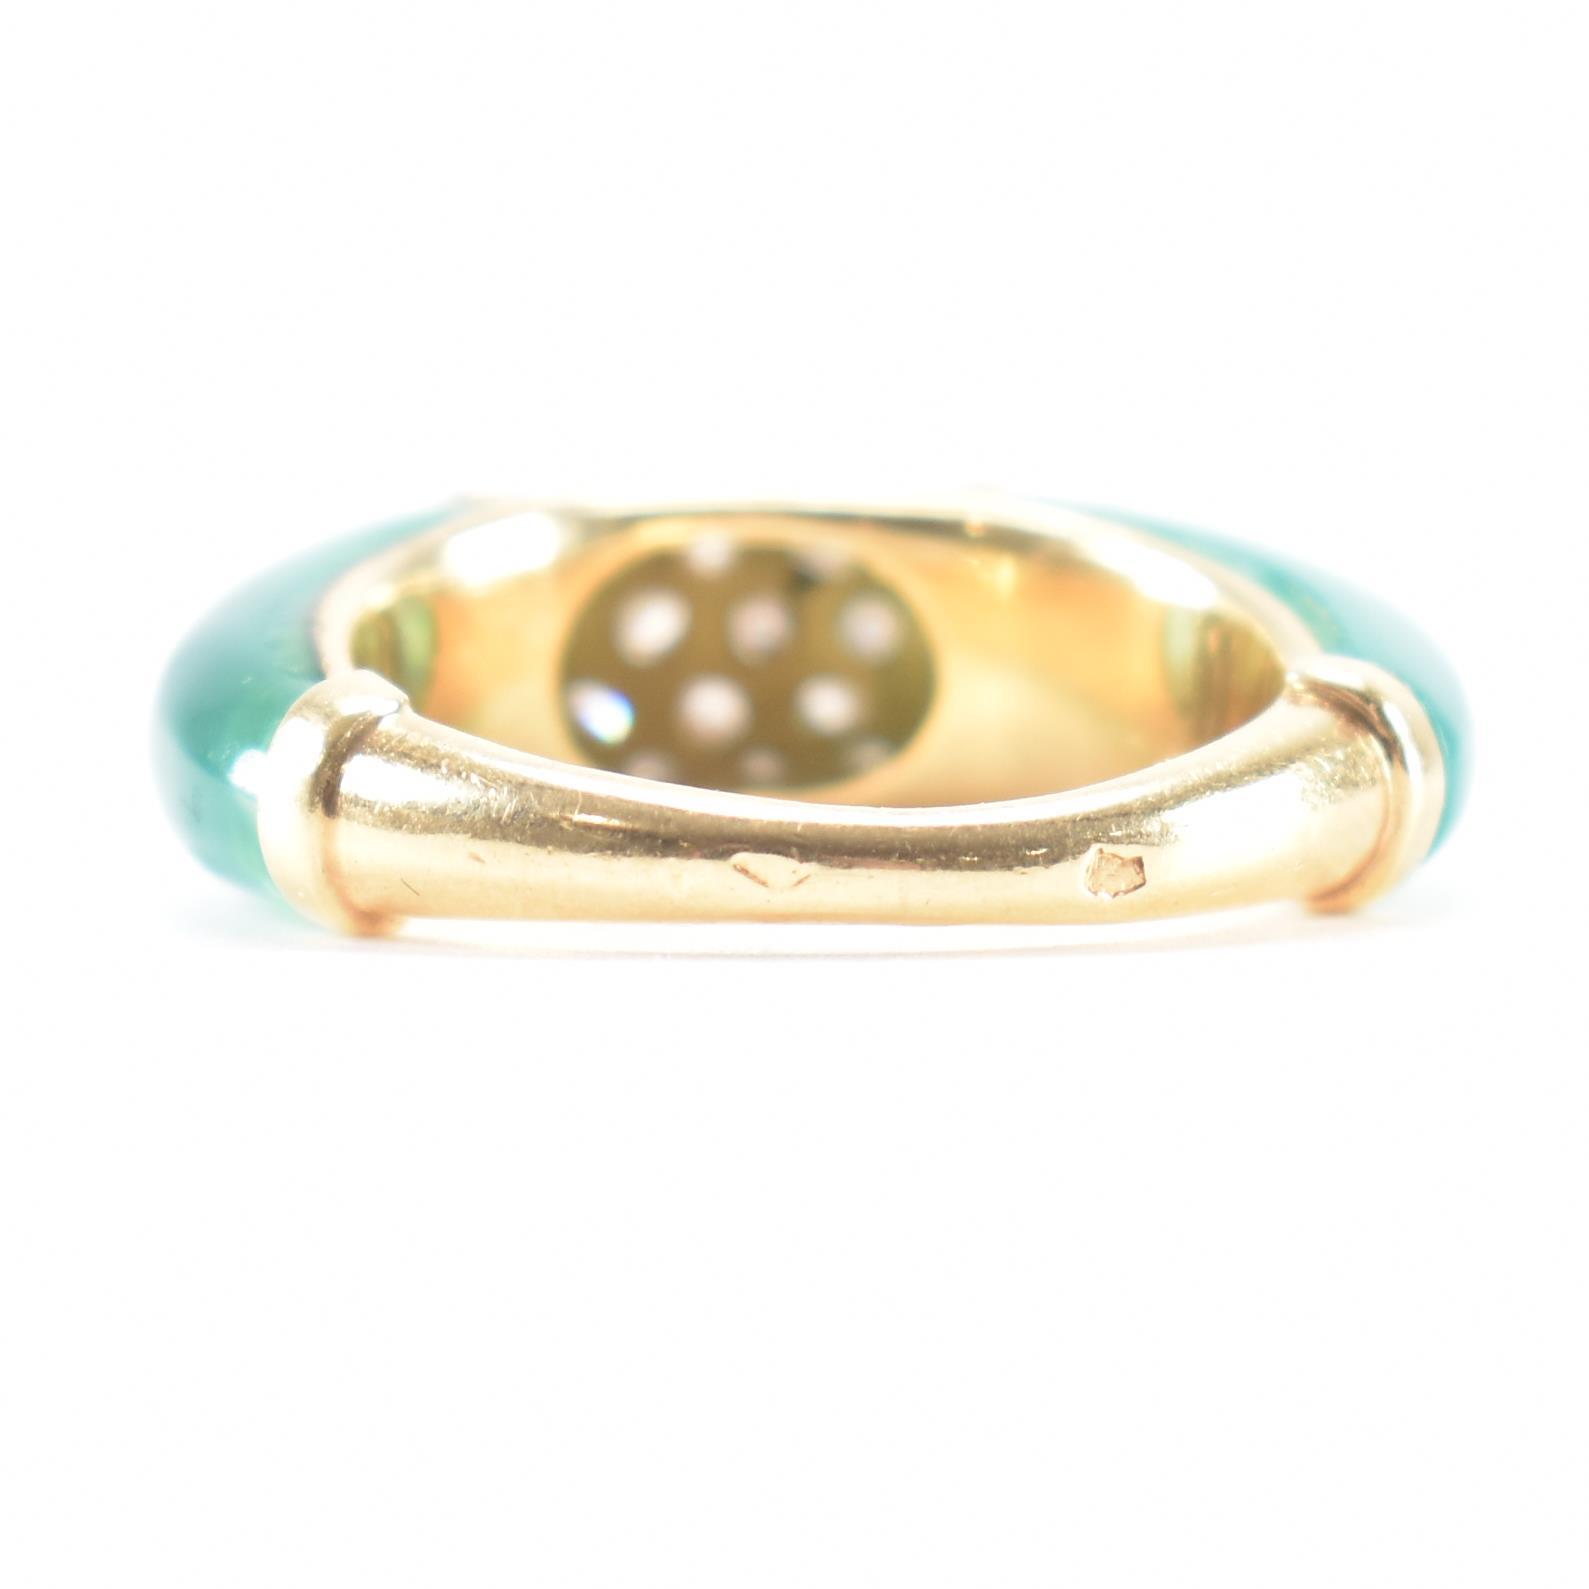 FRENCH GOLD CHALCEDONY & DIAMOND RING - Image 7 of 9